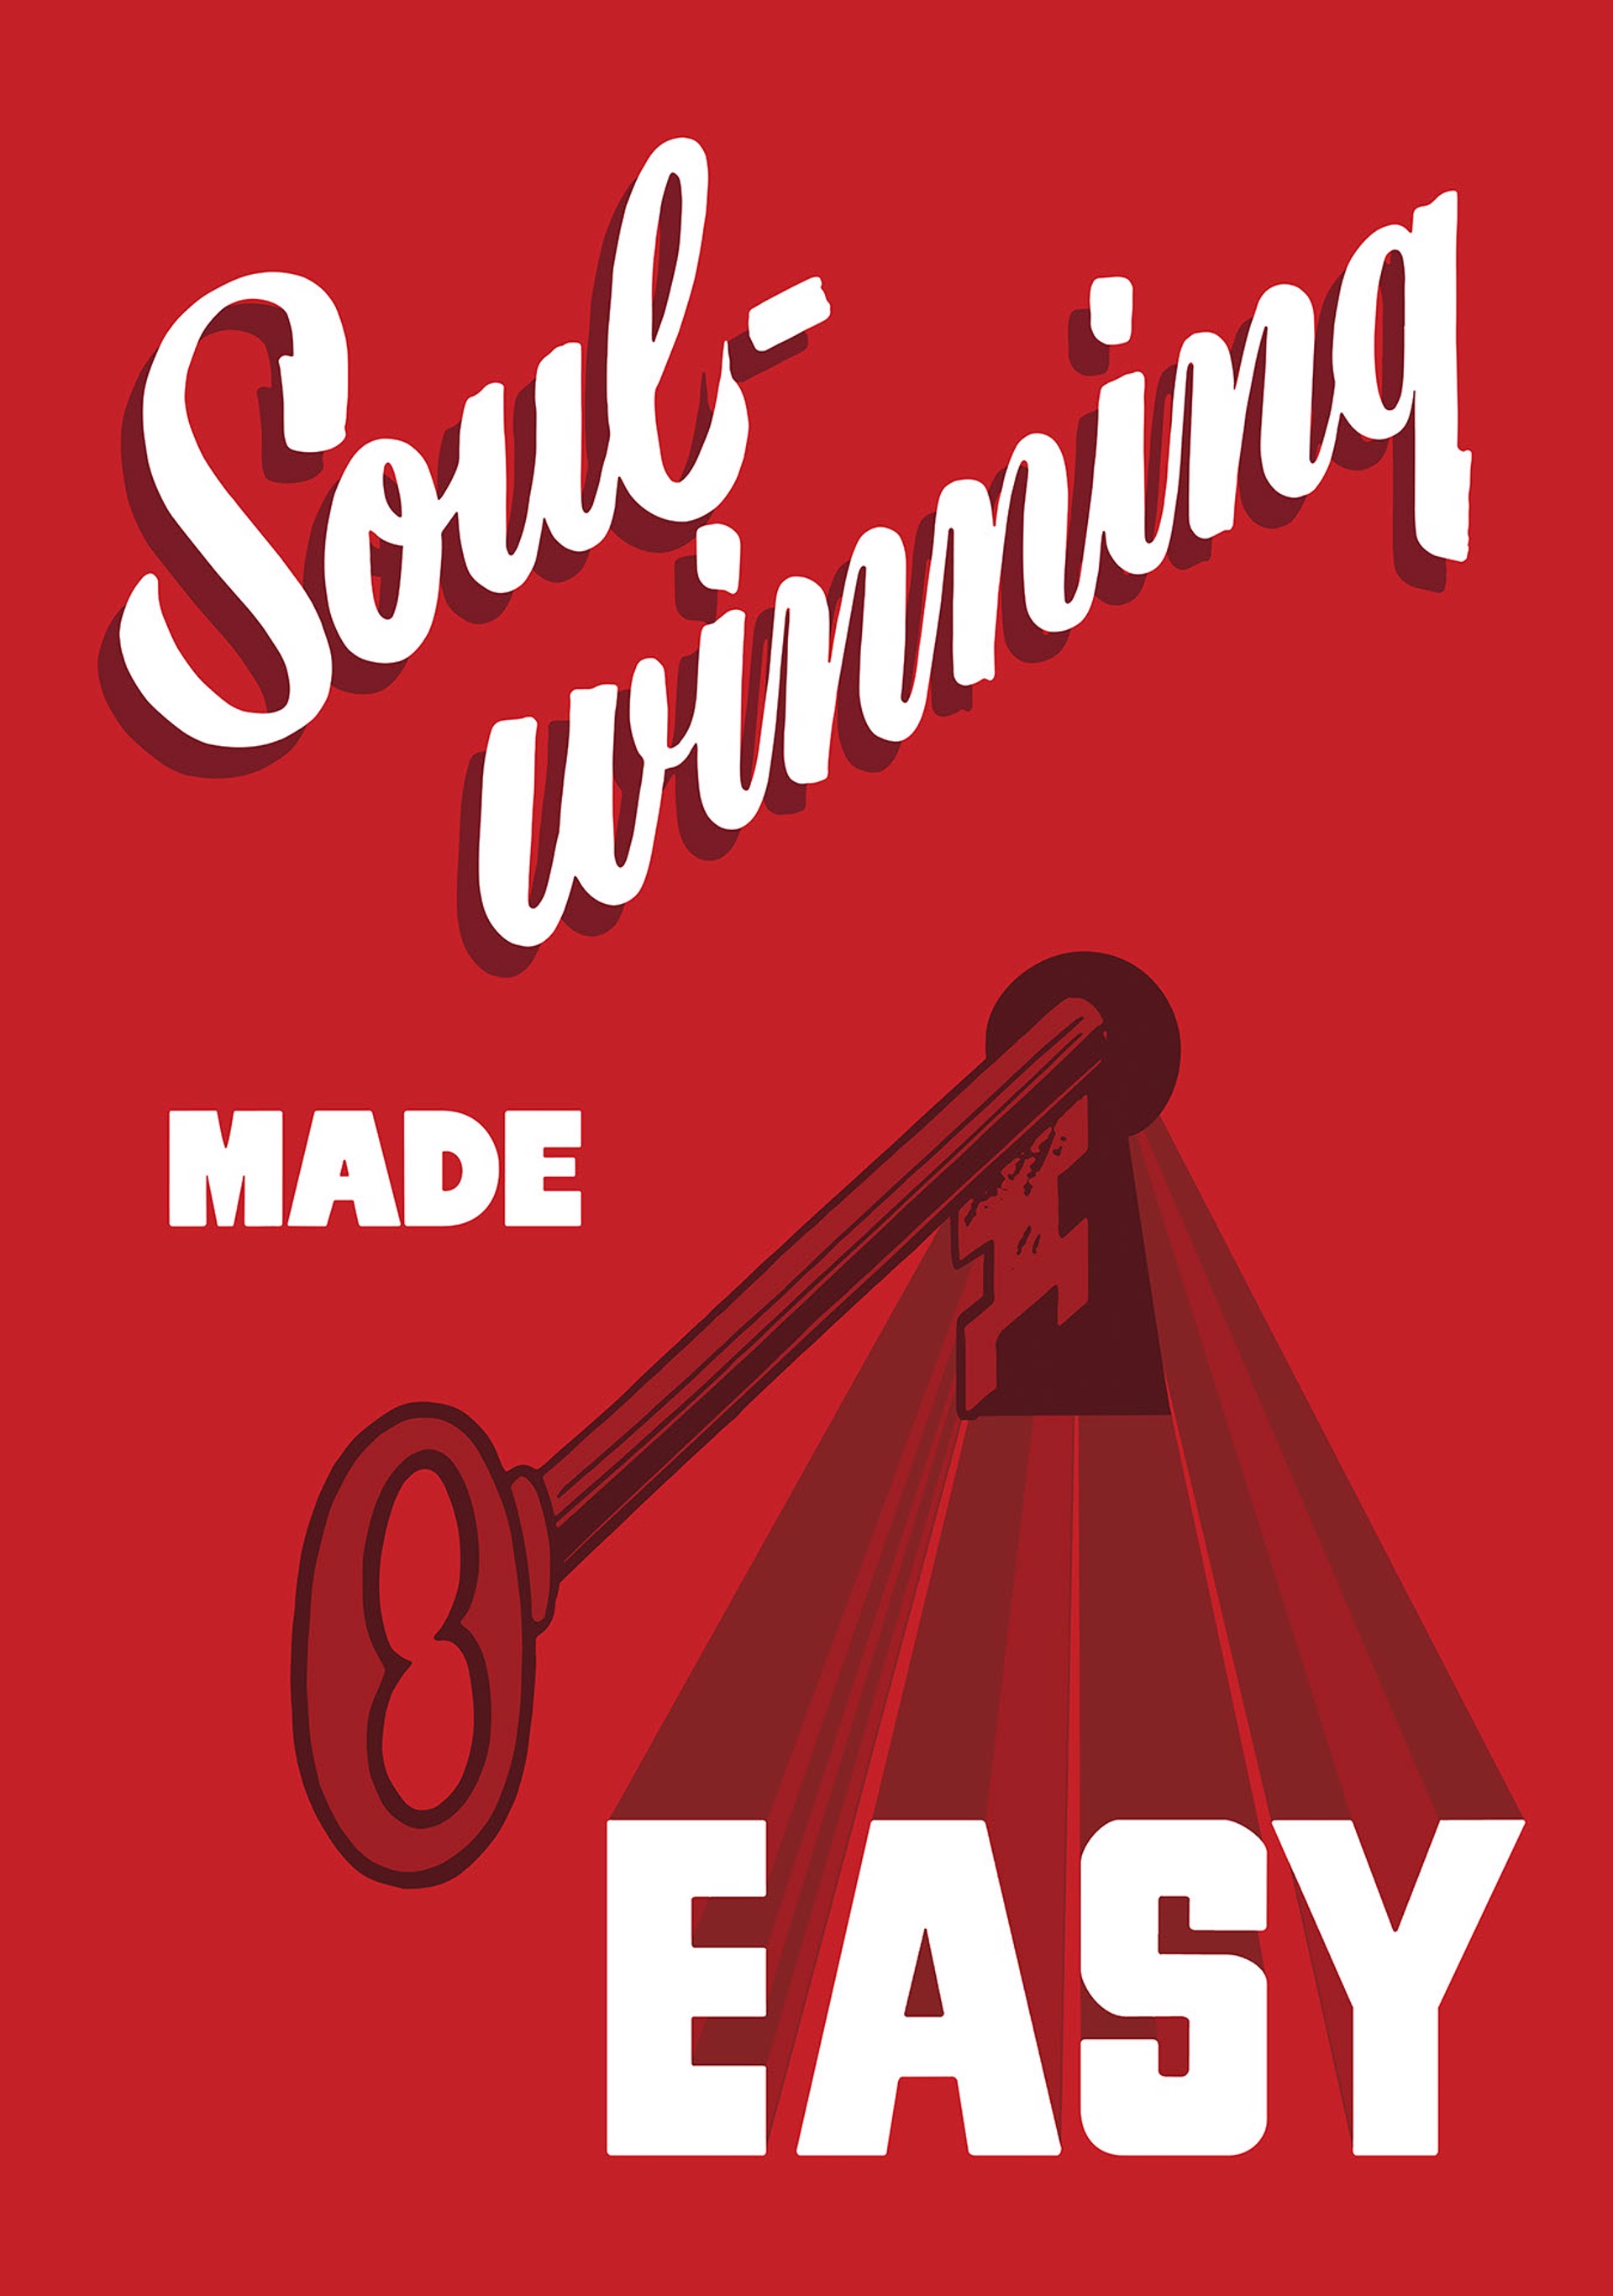 Soul Winning Made Easy by Mark Hosford